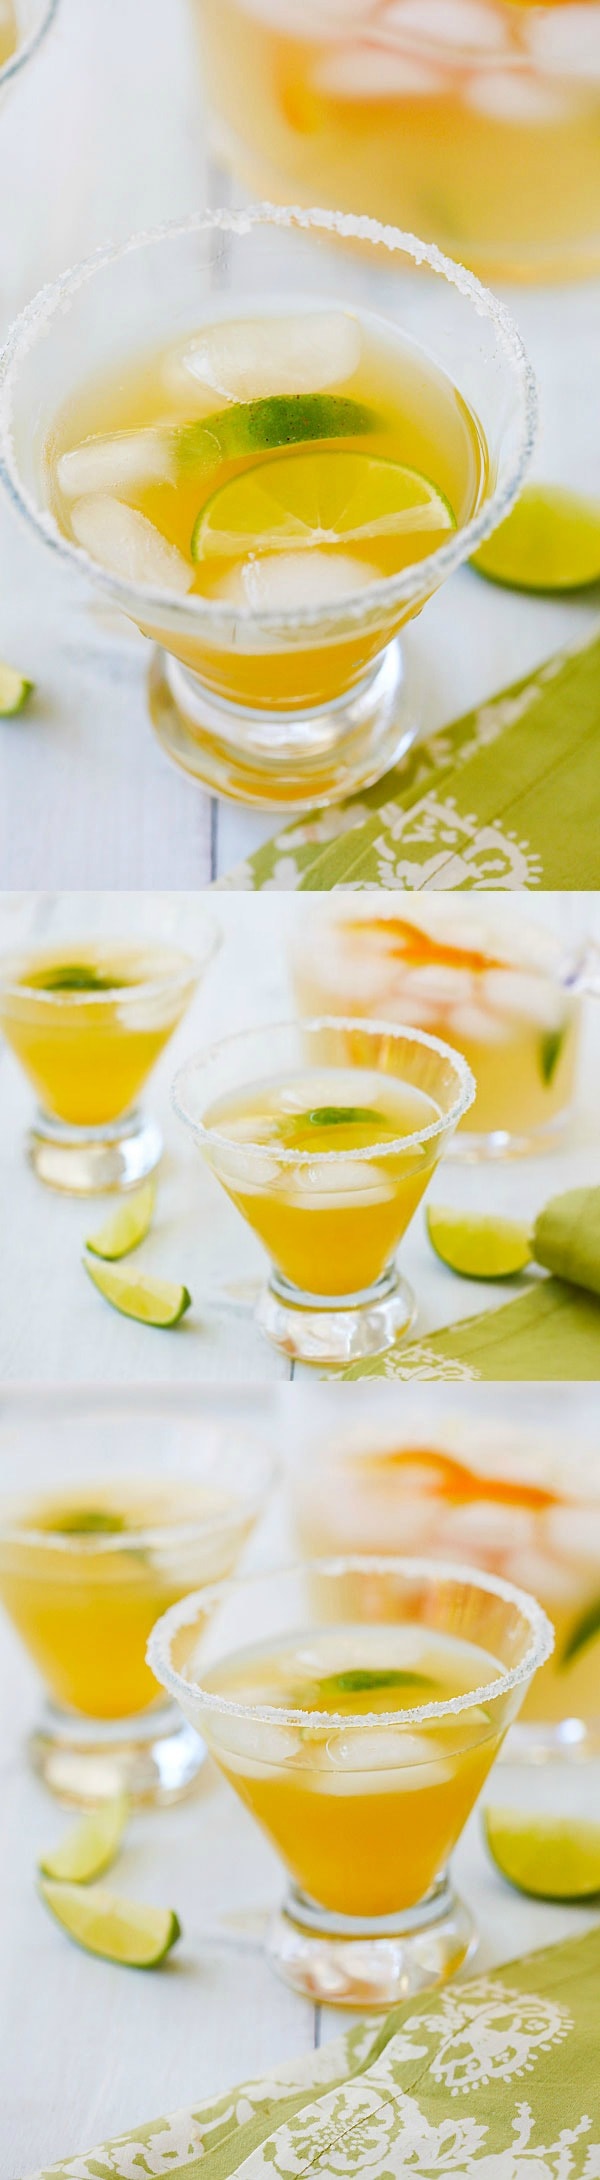 Orange-Lime Margarita - the easiest, best and most refreshing margarita ever with fresh orange juice, lime juice and loads of tequila. | rasamalaysia.com